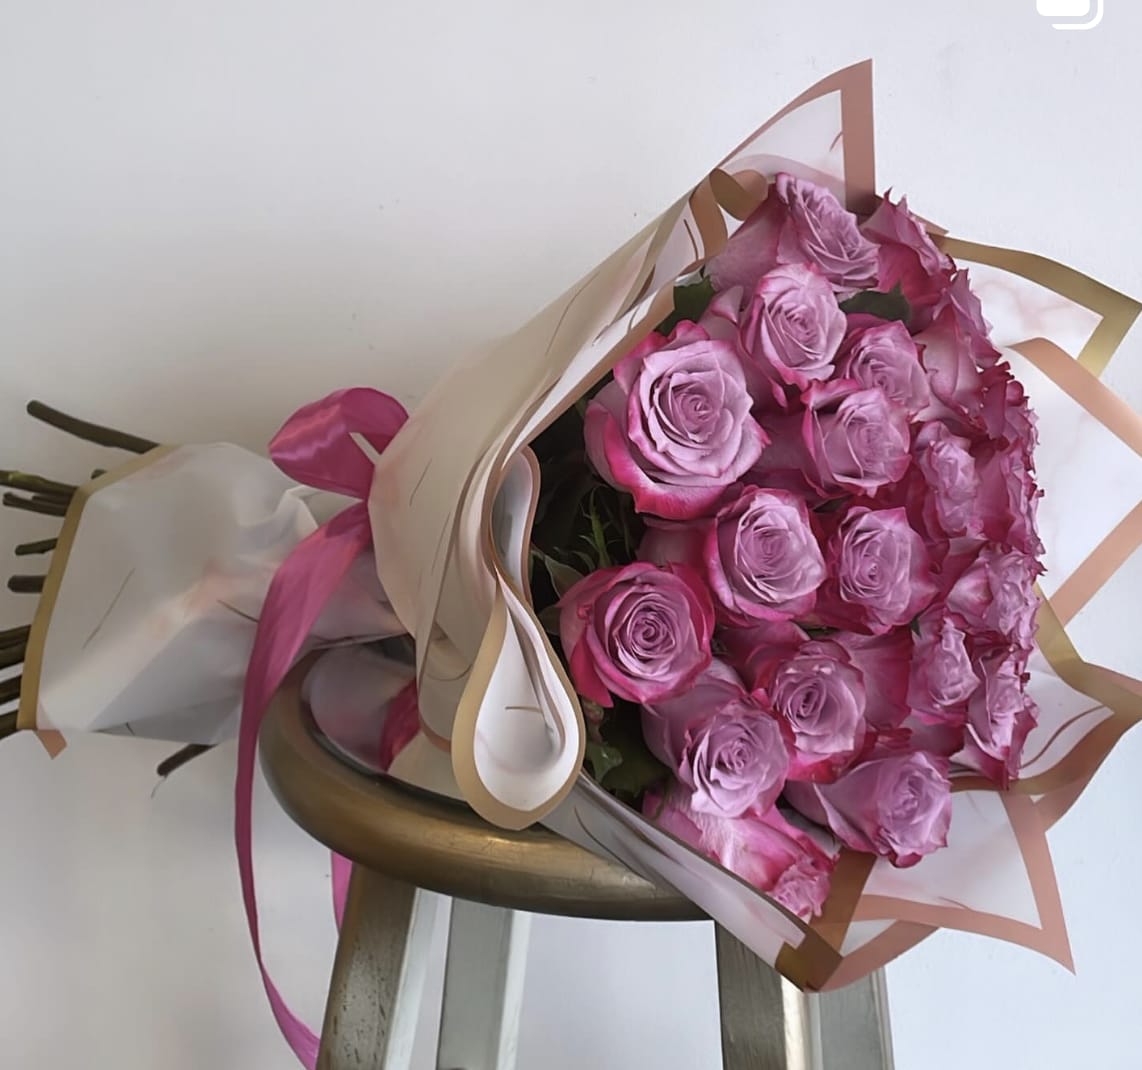 Purple Rose Bouquet -  Elevate your gift-giving with a stunning arrangement of 25 luxurious purple roses elegantly wrapped in a bouquet. Make a lasting impression with this exquisite floral display that is sure to delight any recipient.